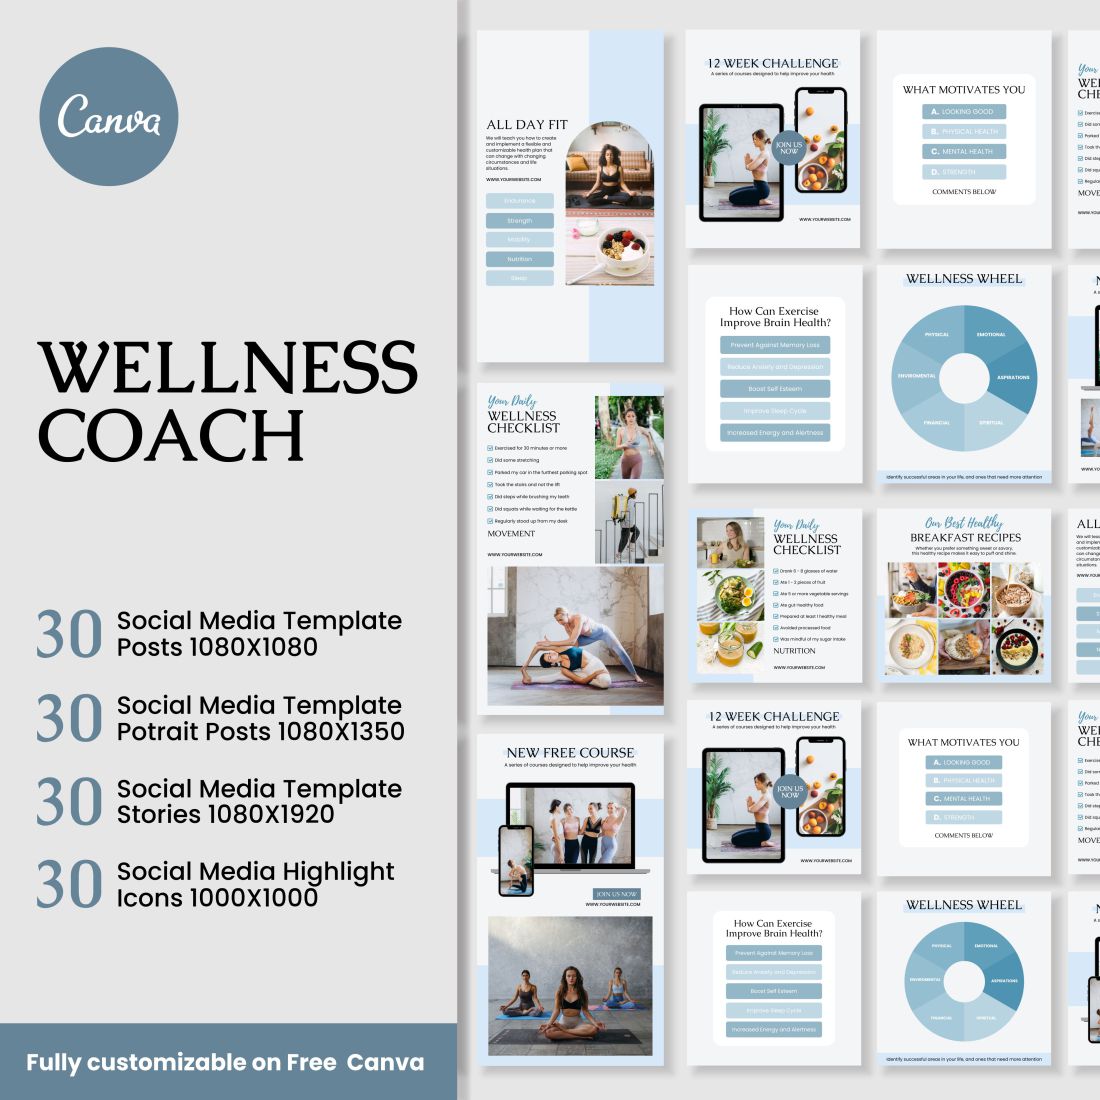 Wellness Coach Instagram Template Cover Image.